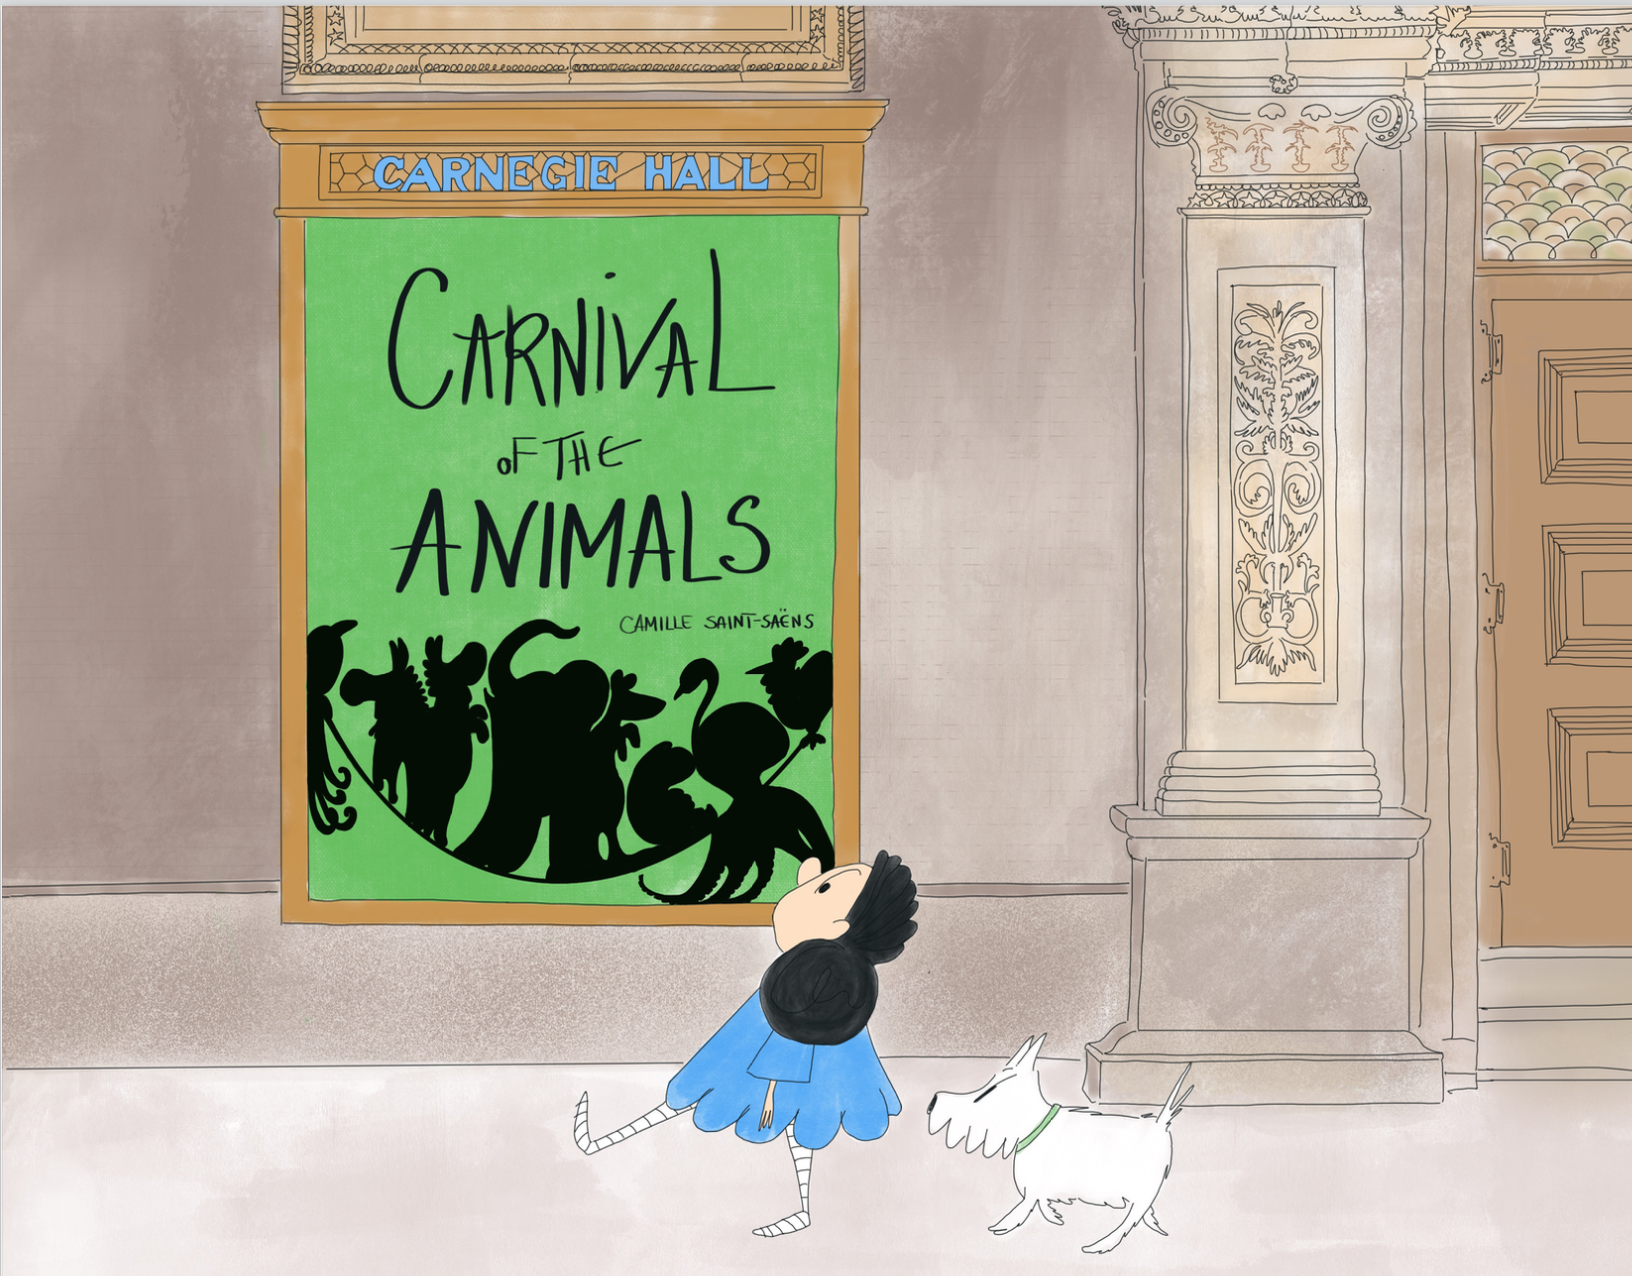 The Carnival of the Animals - Wikipedia